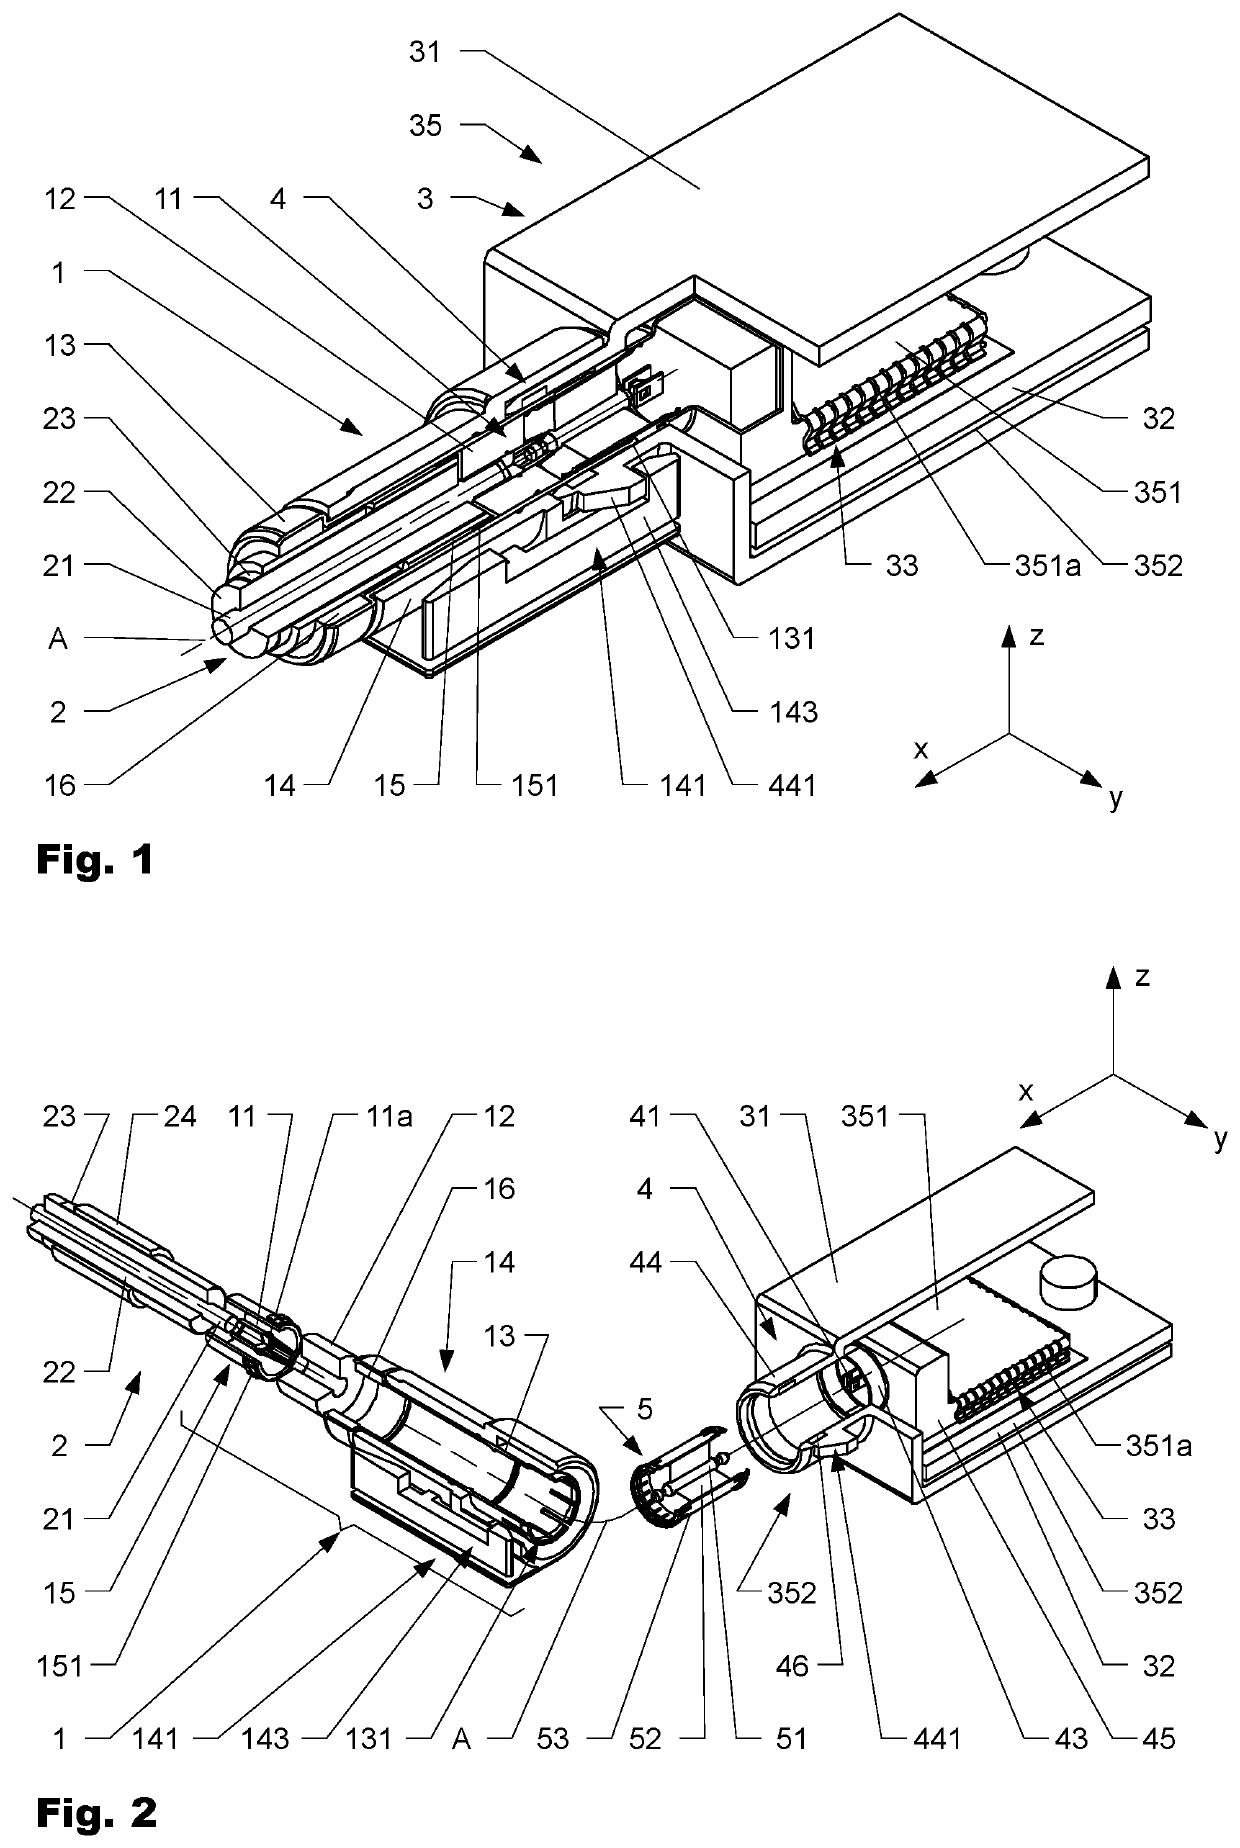 Coaxial connector and cable assembly